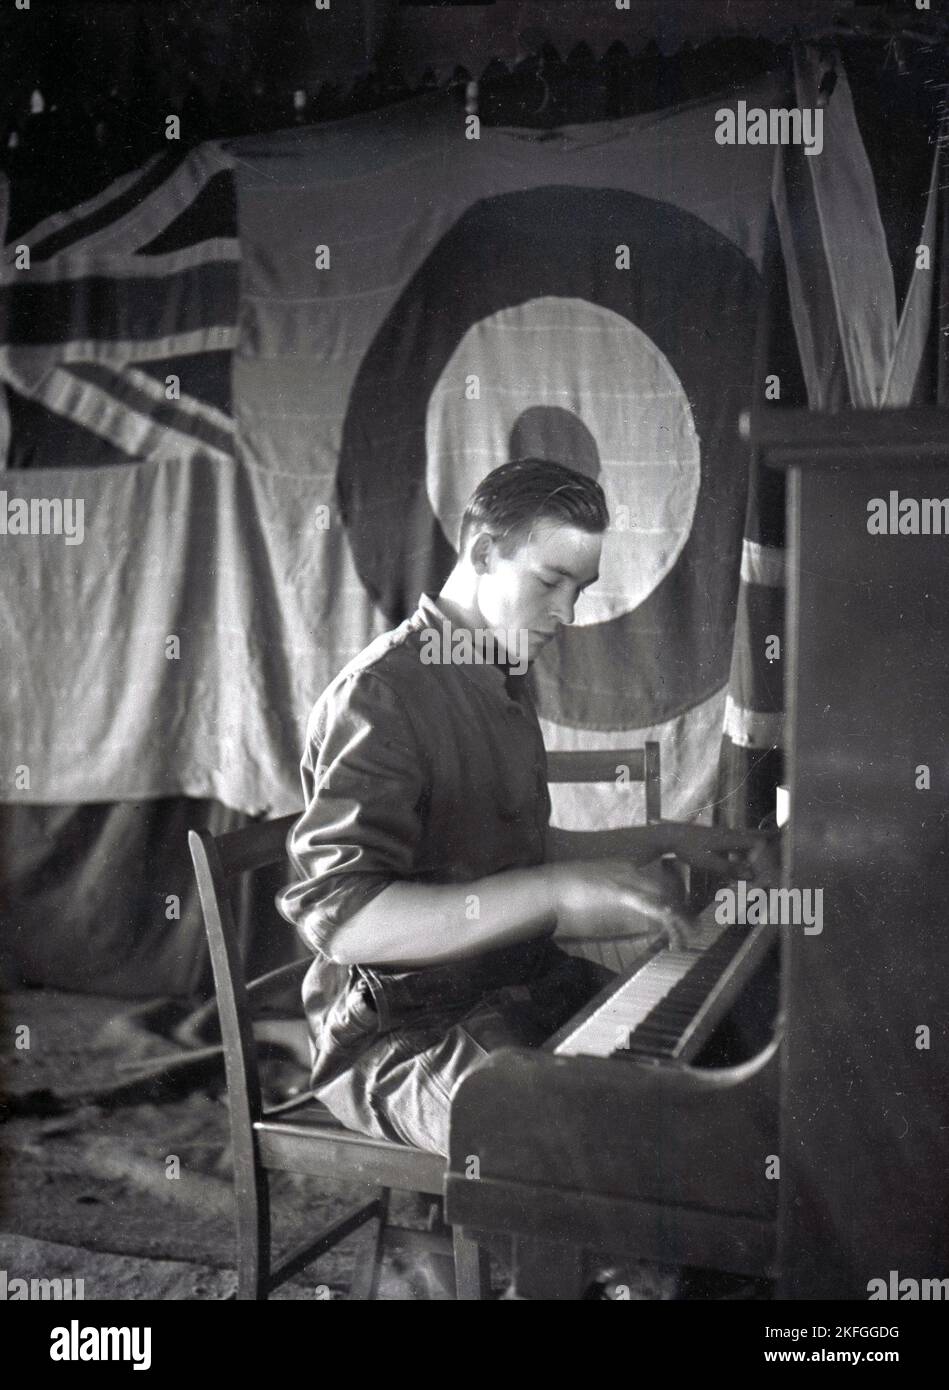 1948, historical, a British airman sitting playing the piano at Longford Camp, RAF Ternhiill, Market Drayton, Shropshire, England, UK. A hanging cloth backdrop on the stage has a union jack logo and the RAF roundel, first introduced with the Royal Flying Corps in WW1. Stock Photo